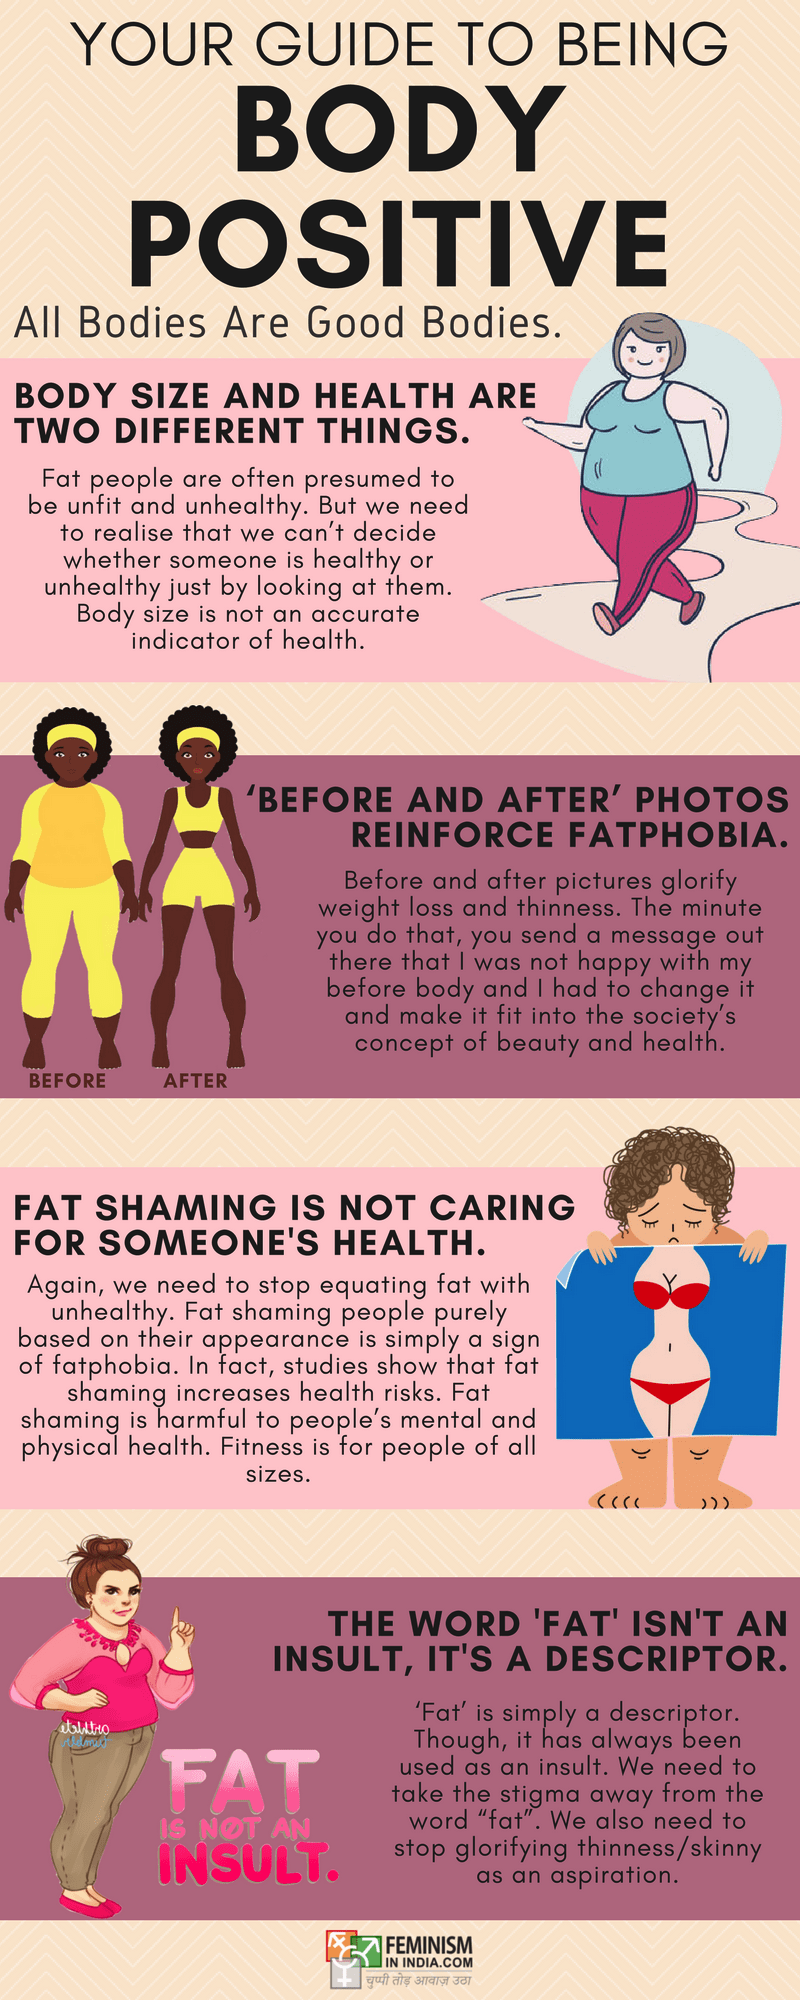 Body positivity is not for people whose bodies are already